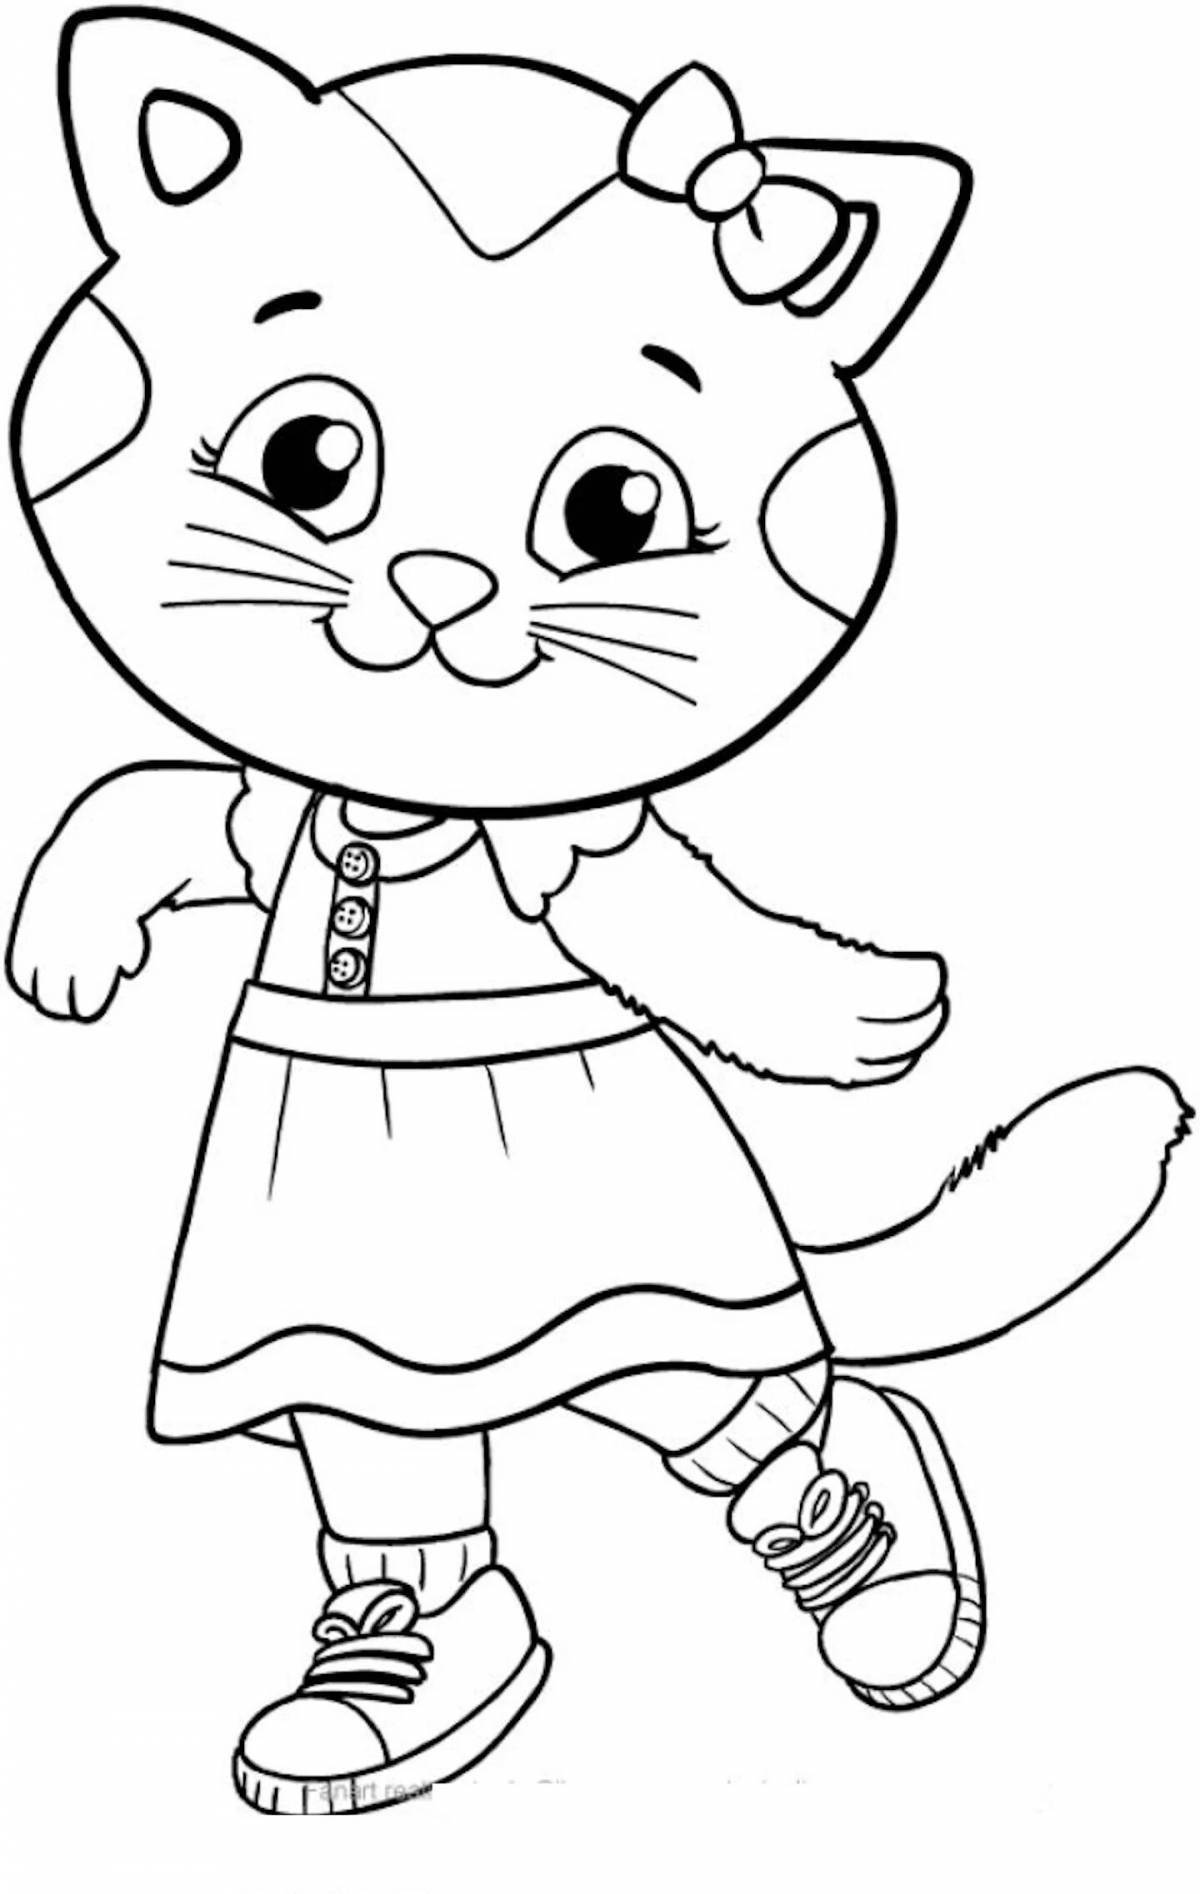 Coloring book brave cat angela